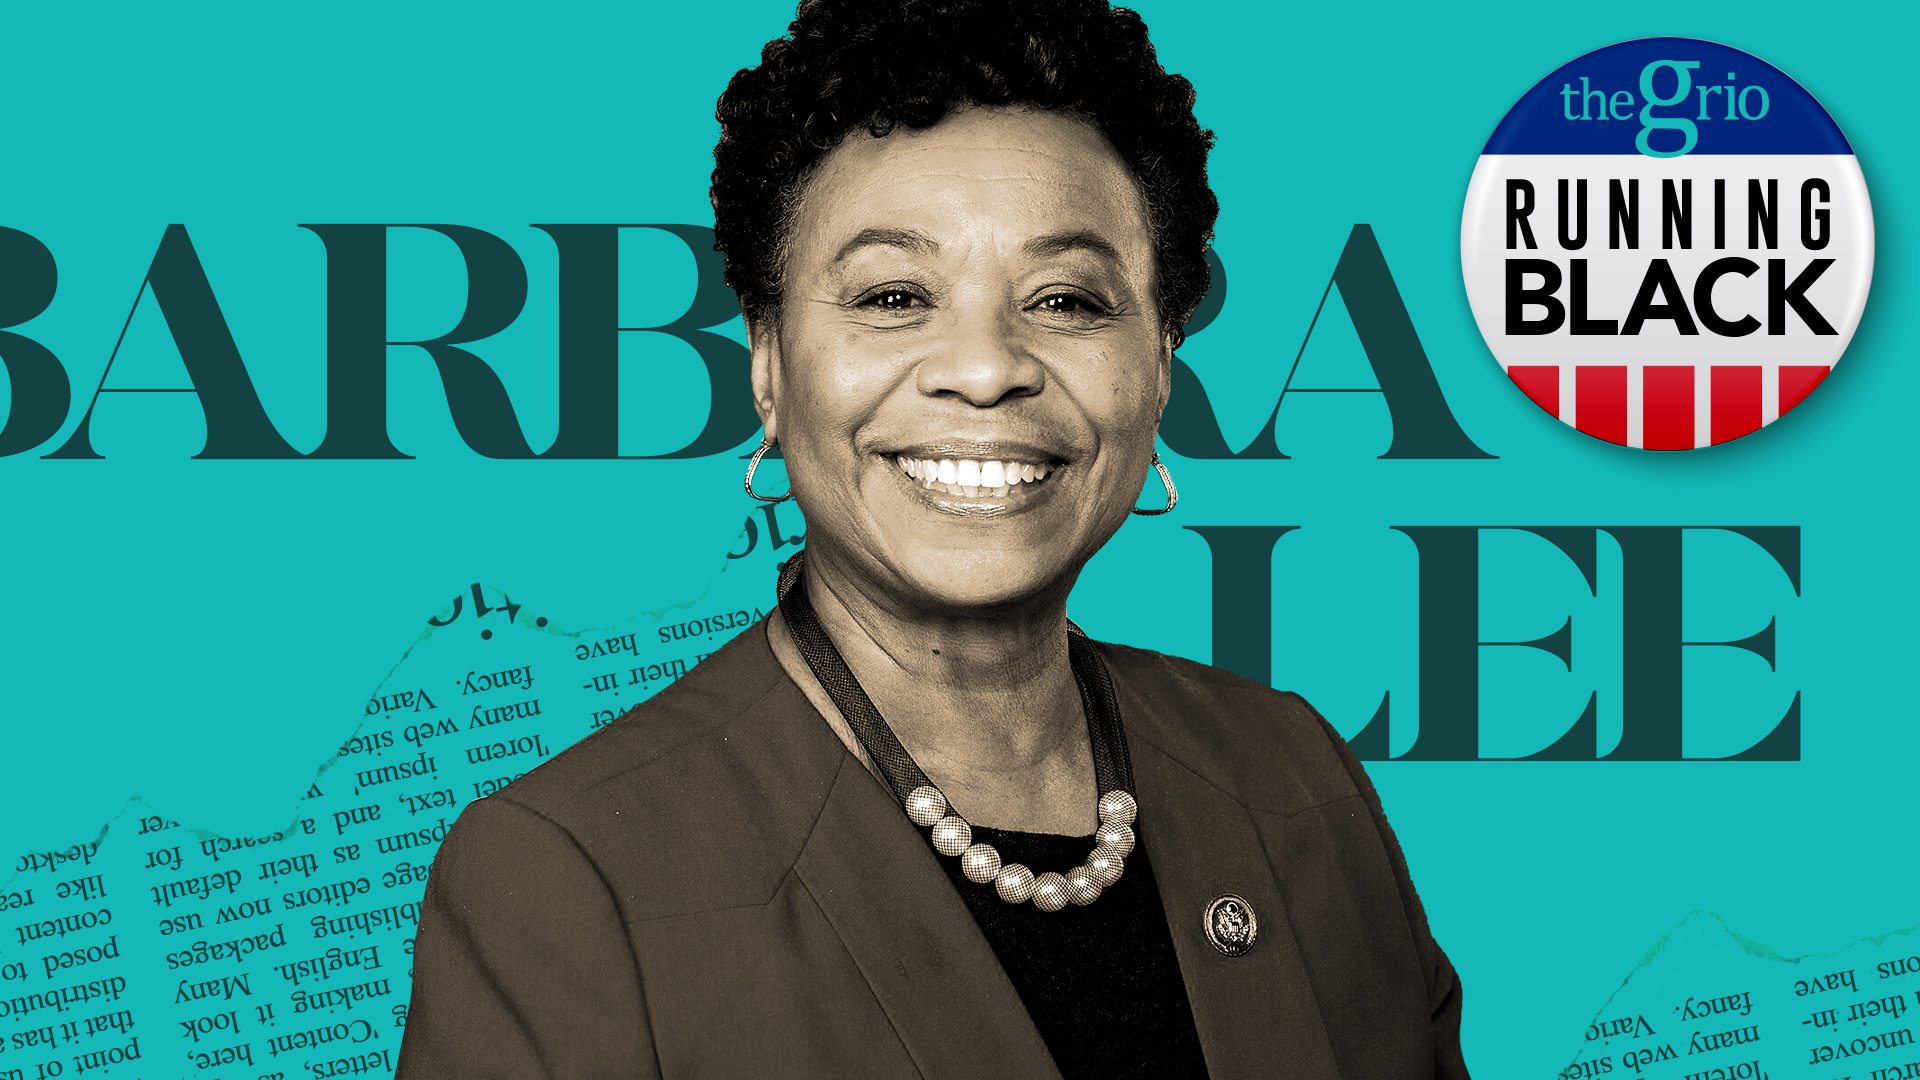 Barbara Lee, former Black Panther Party member, aims to take fight to US Senate